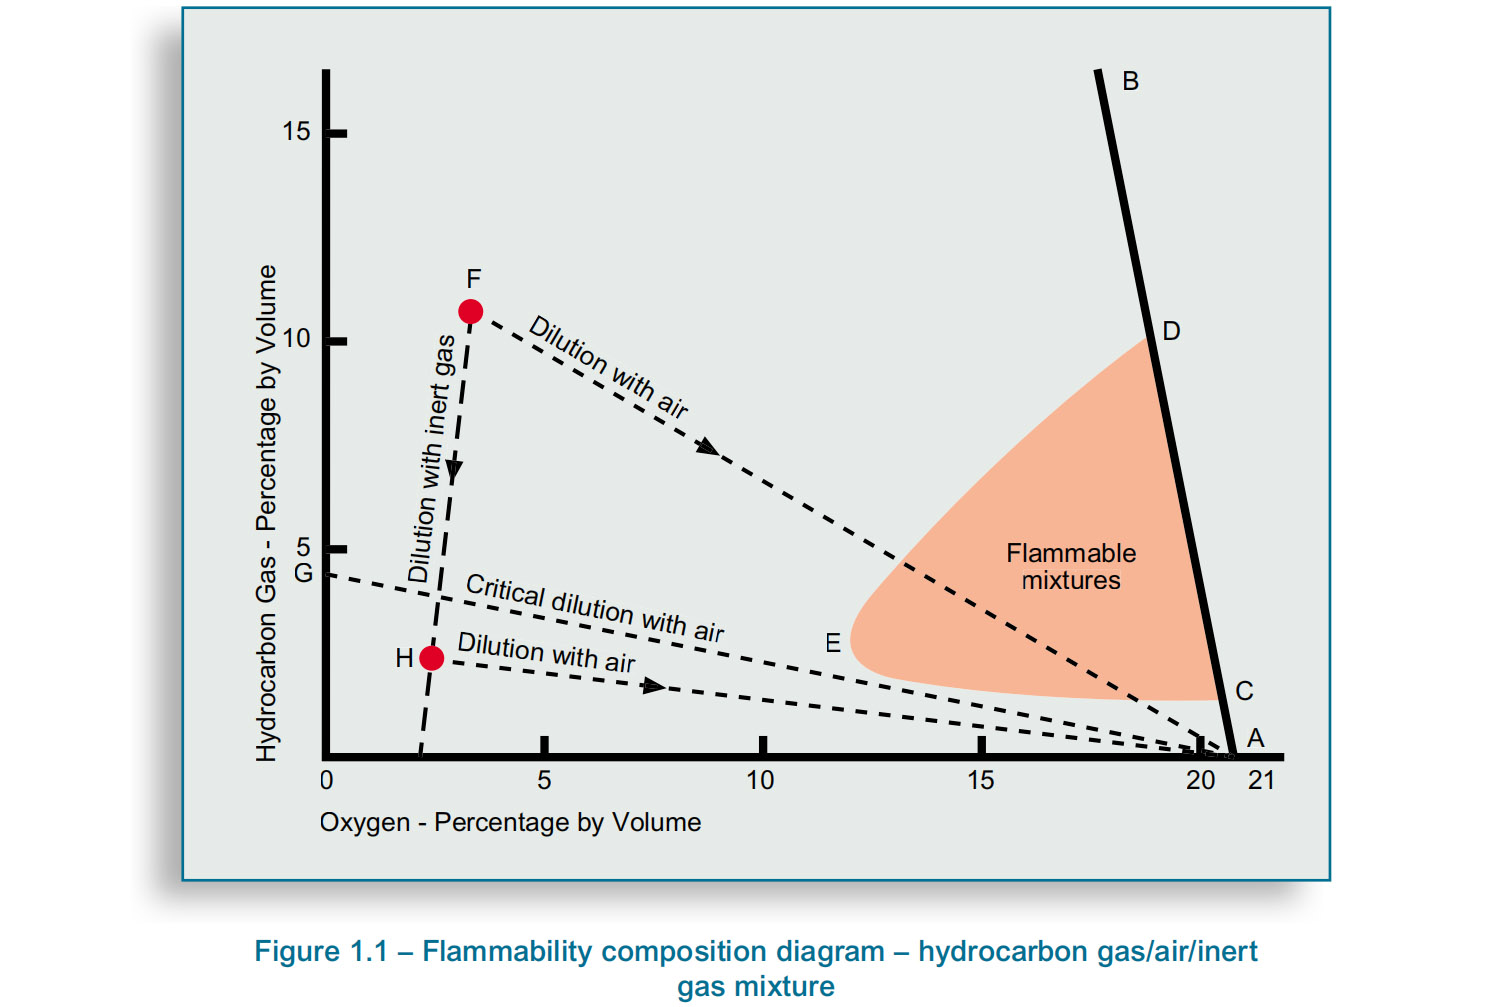 Flammability Composition Diagram showing the hydrocarbon gas percentage by volume and the oxygen percentage by volume as well as the flammable mixtures.